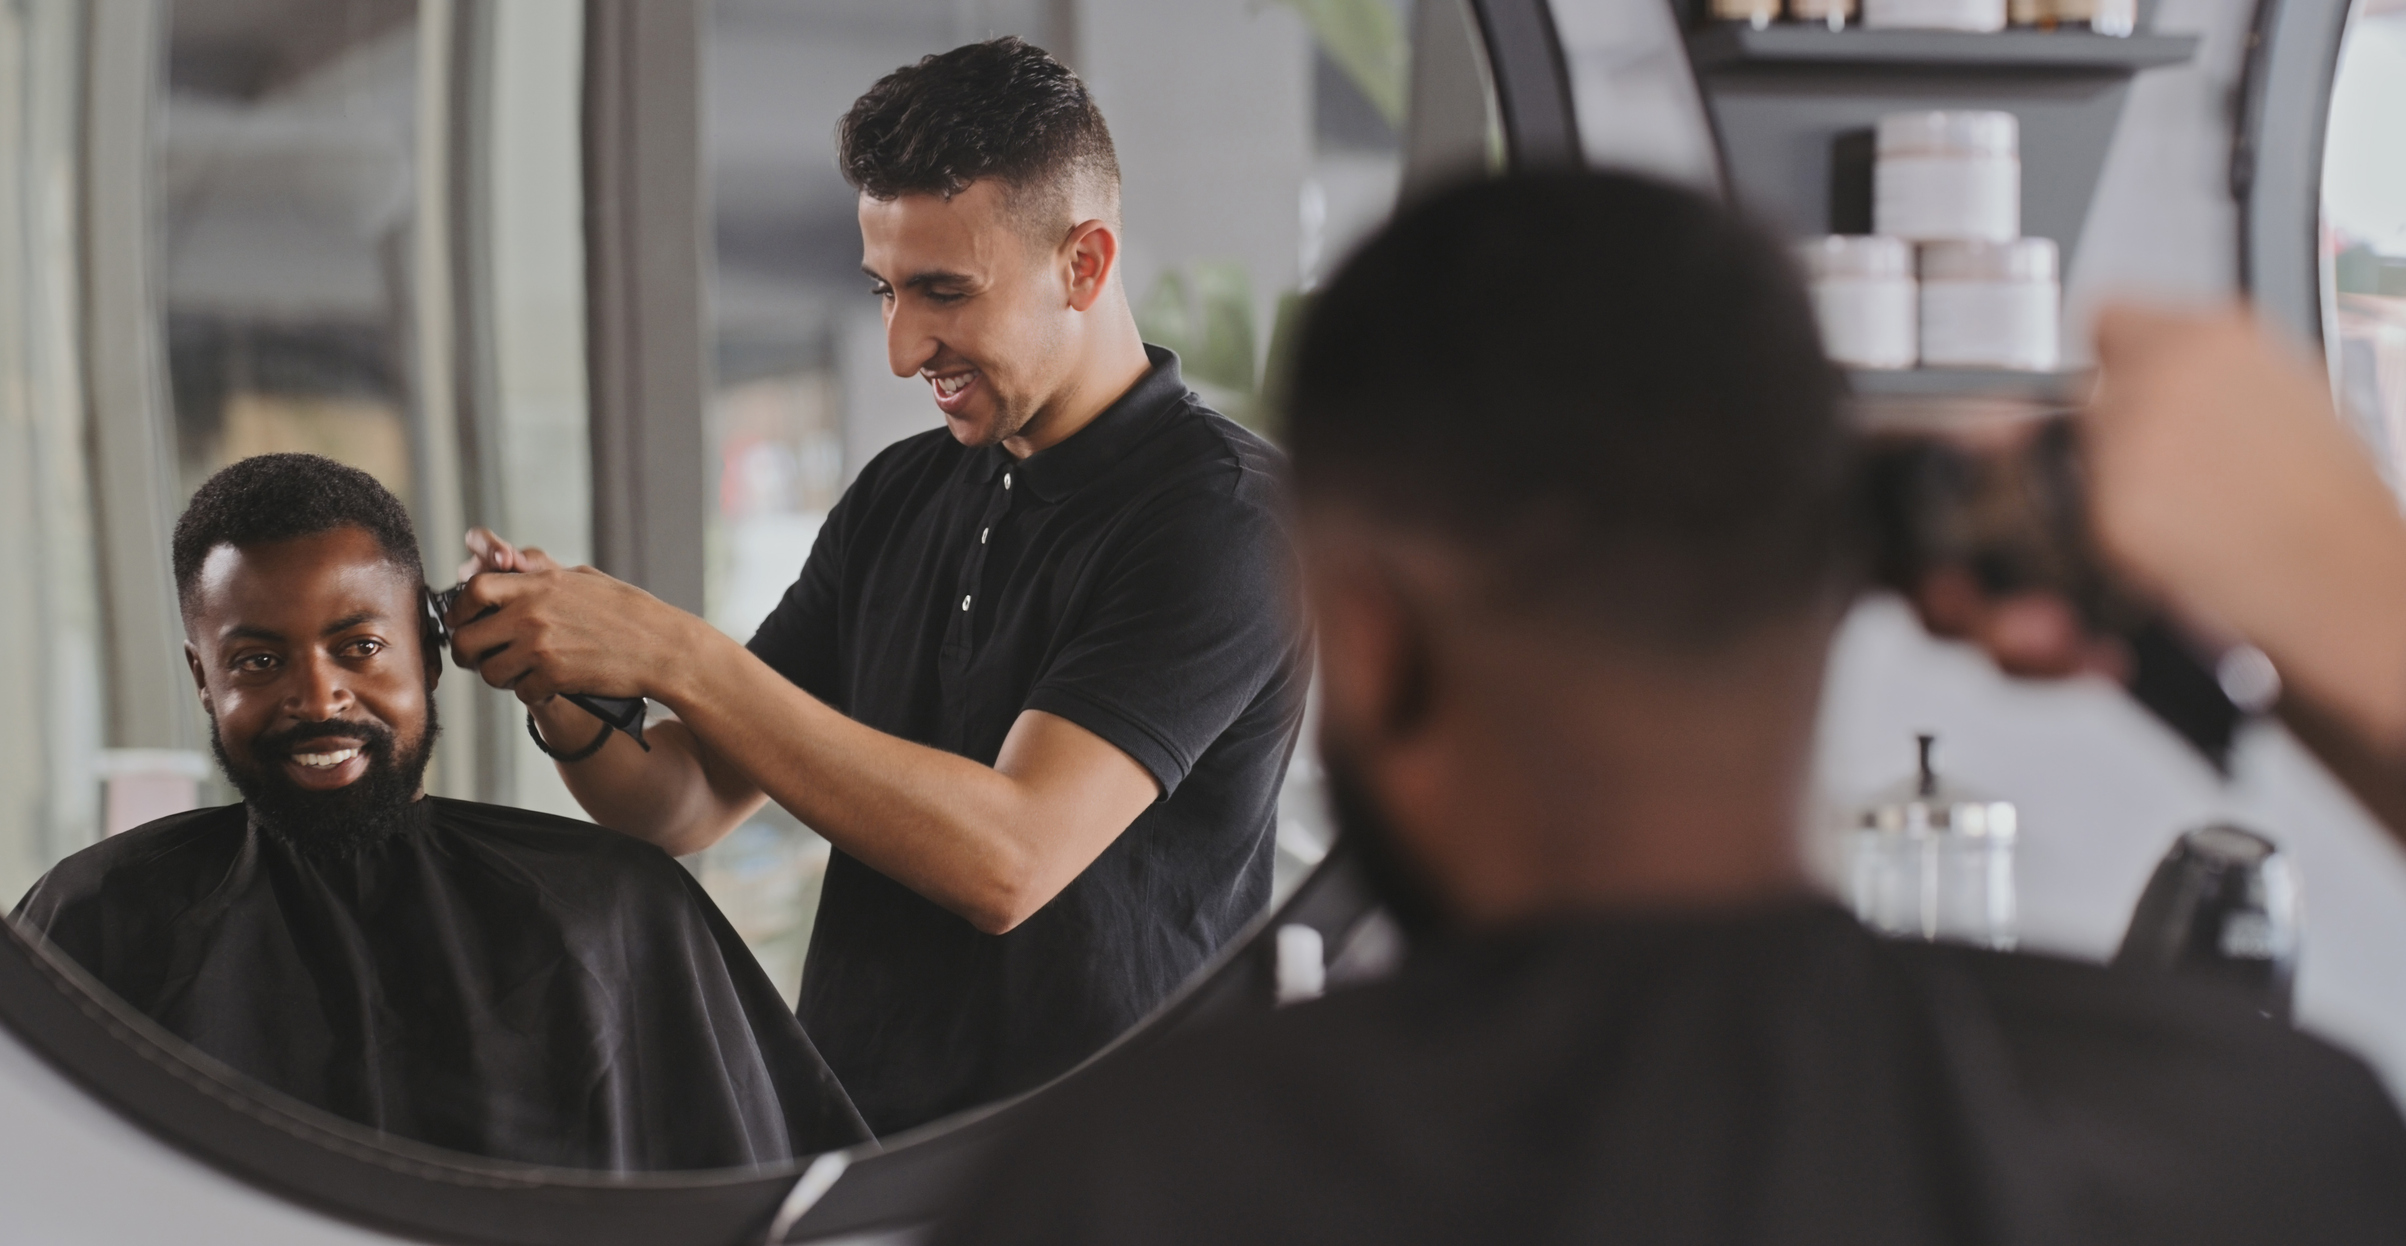 Experience a Sharp Look at the Best Arlington Barbershop